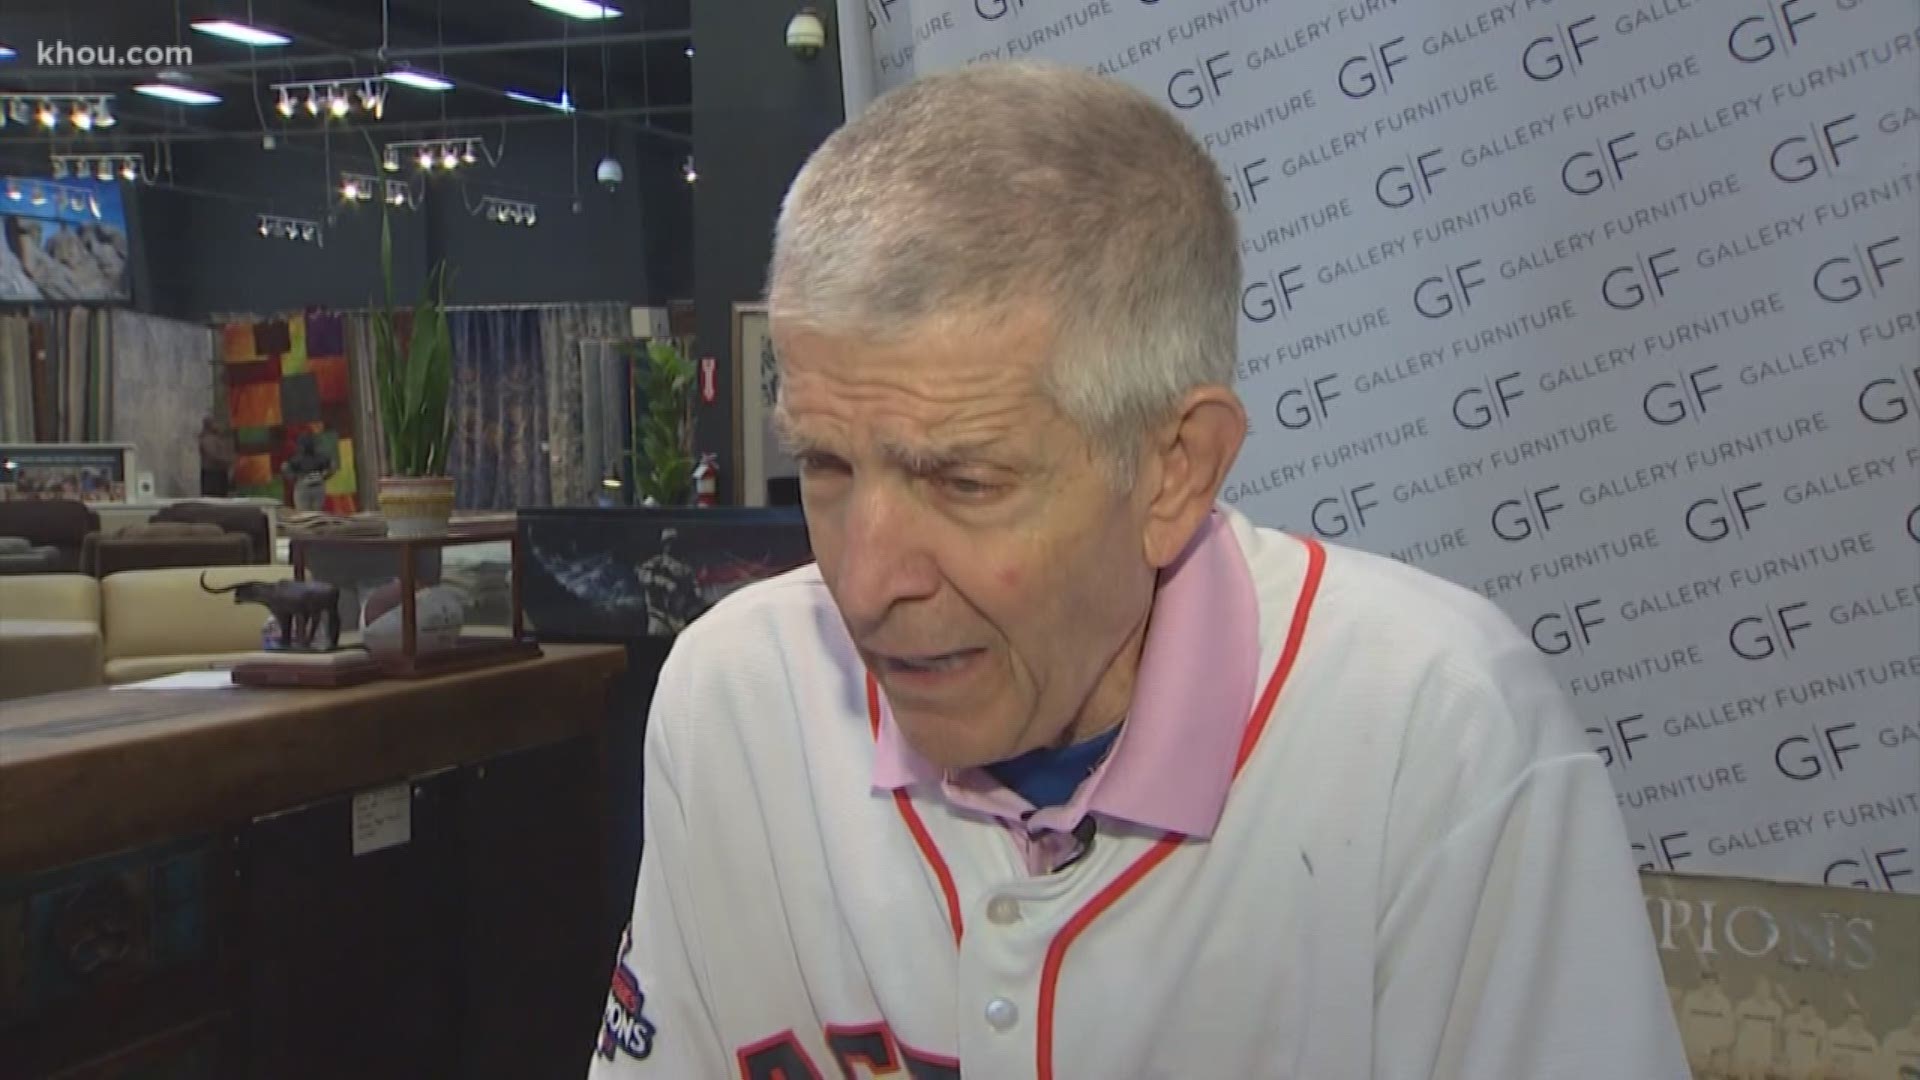 Jim “Mattress Mack” McIngvale lost $13 million on his bet, but sold thousands of mattresses as part of his “win it all” promotion at Gallery Furniture.